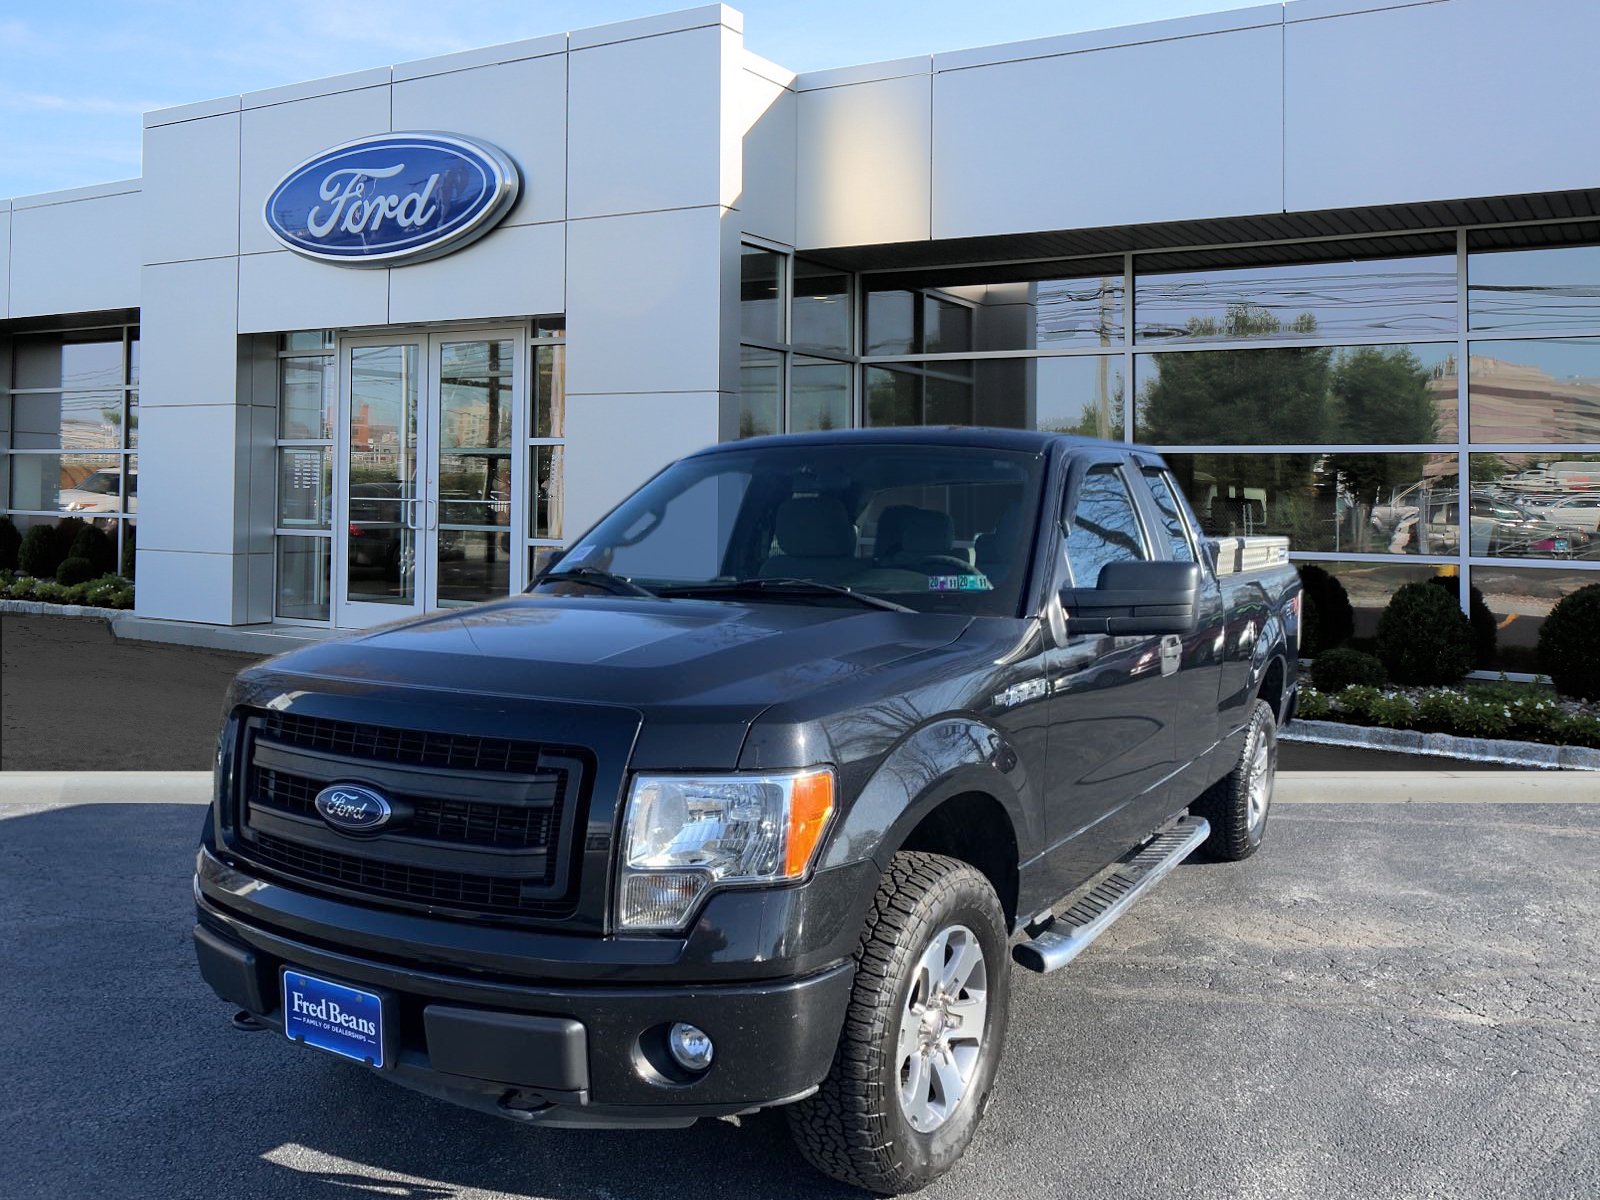 Pre Owned 2013 Ford F 150 Stx 4wd Extended Cab Pickup